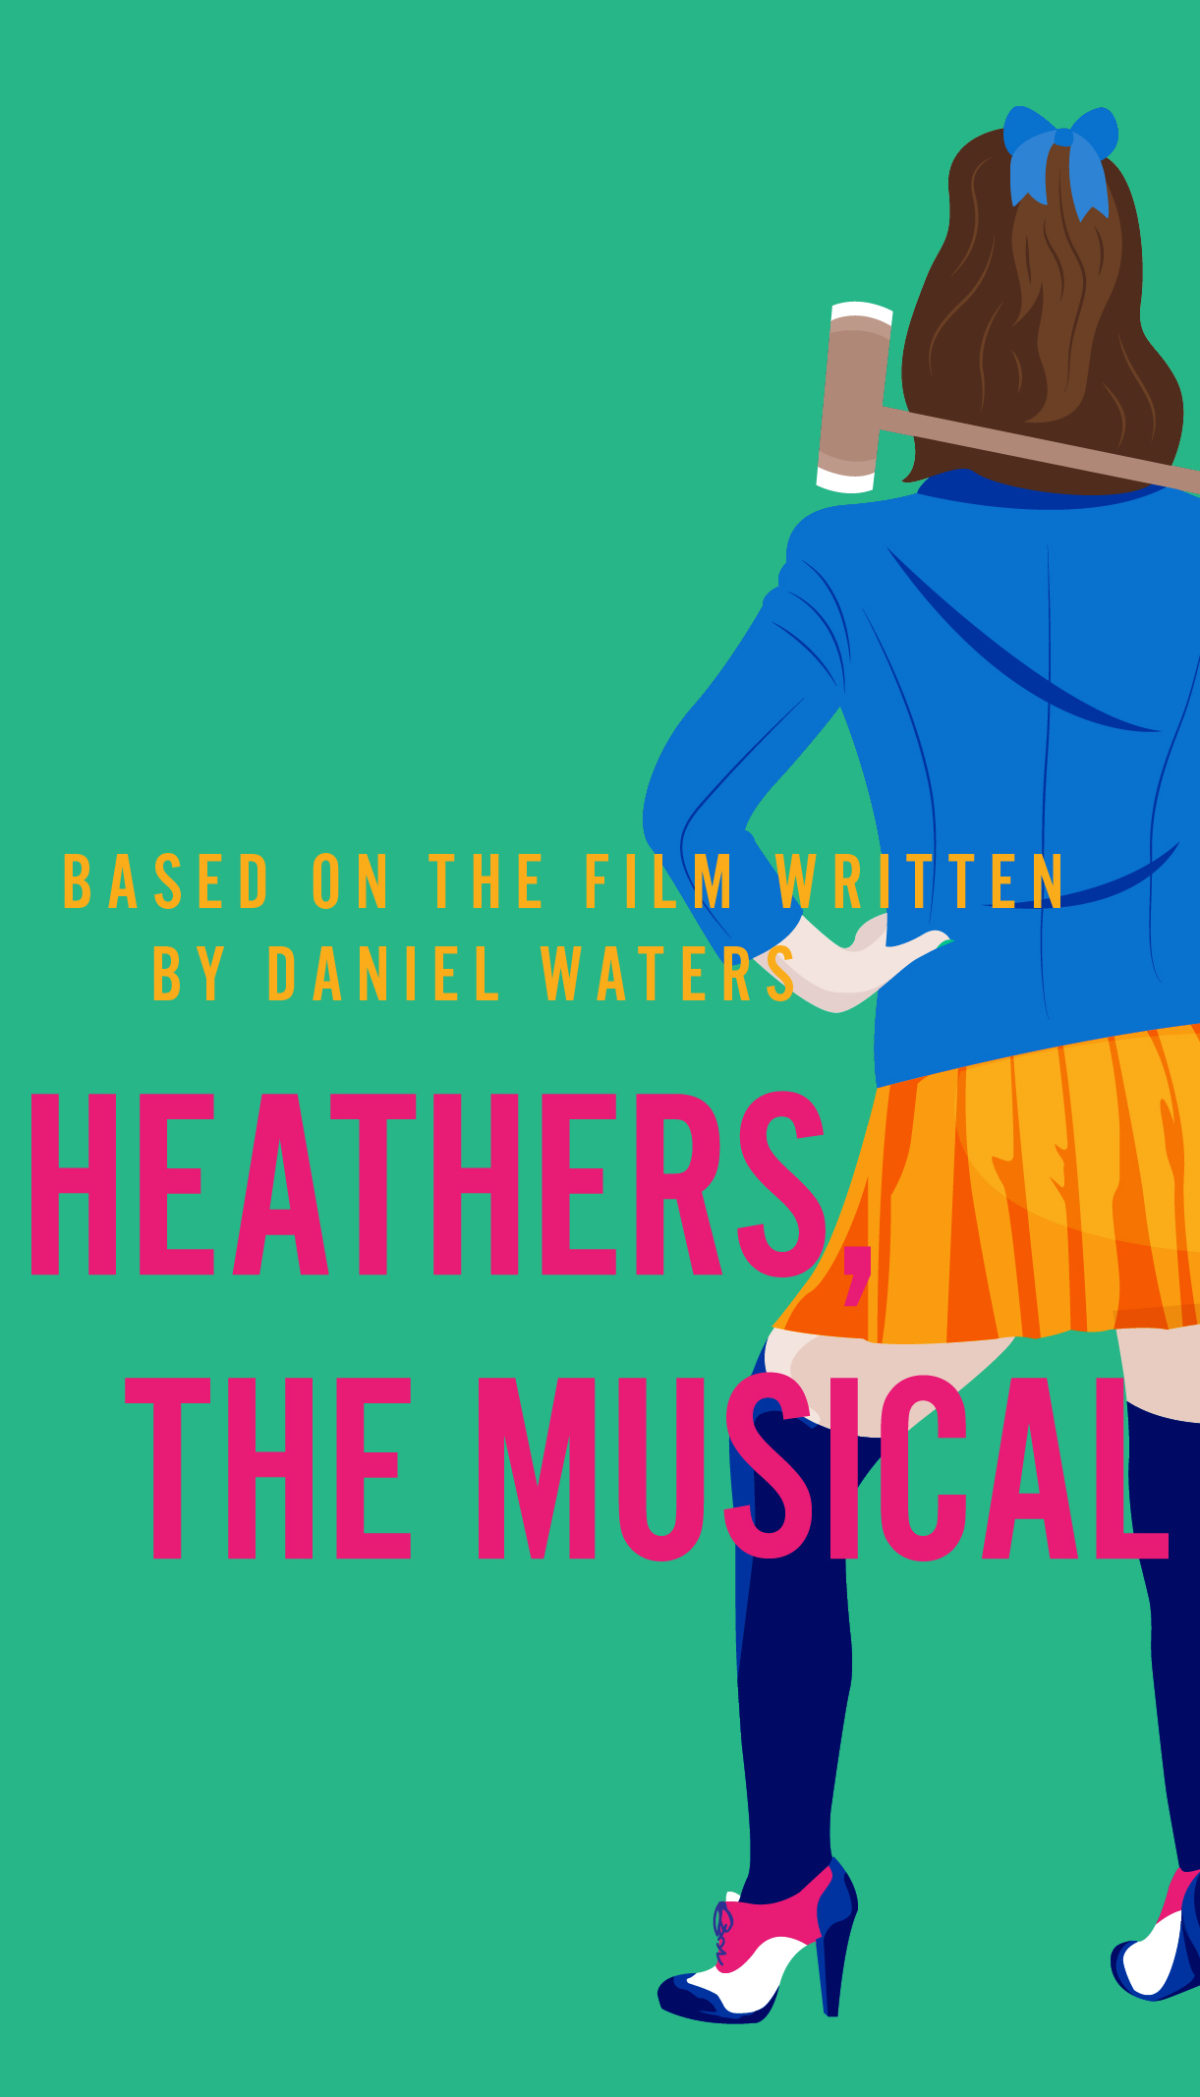 HEATHERS, THE MUSICAL